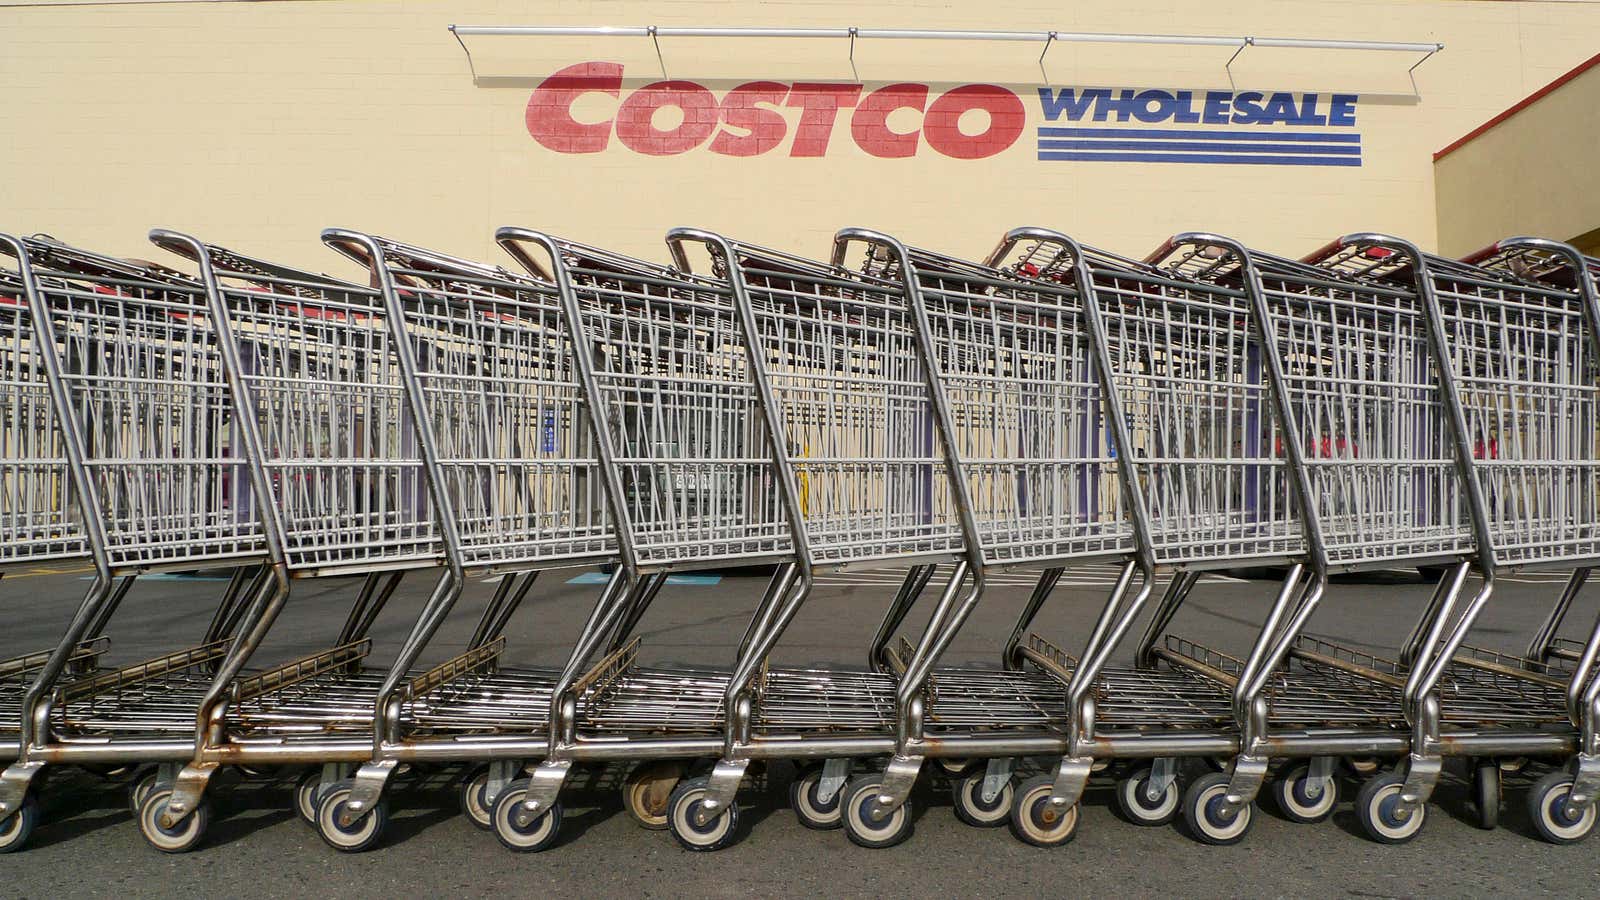 Why Costco is itching to open stores in one of the world’s worst economies